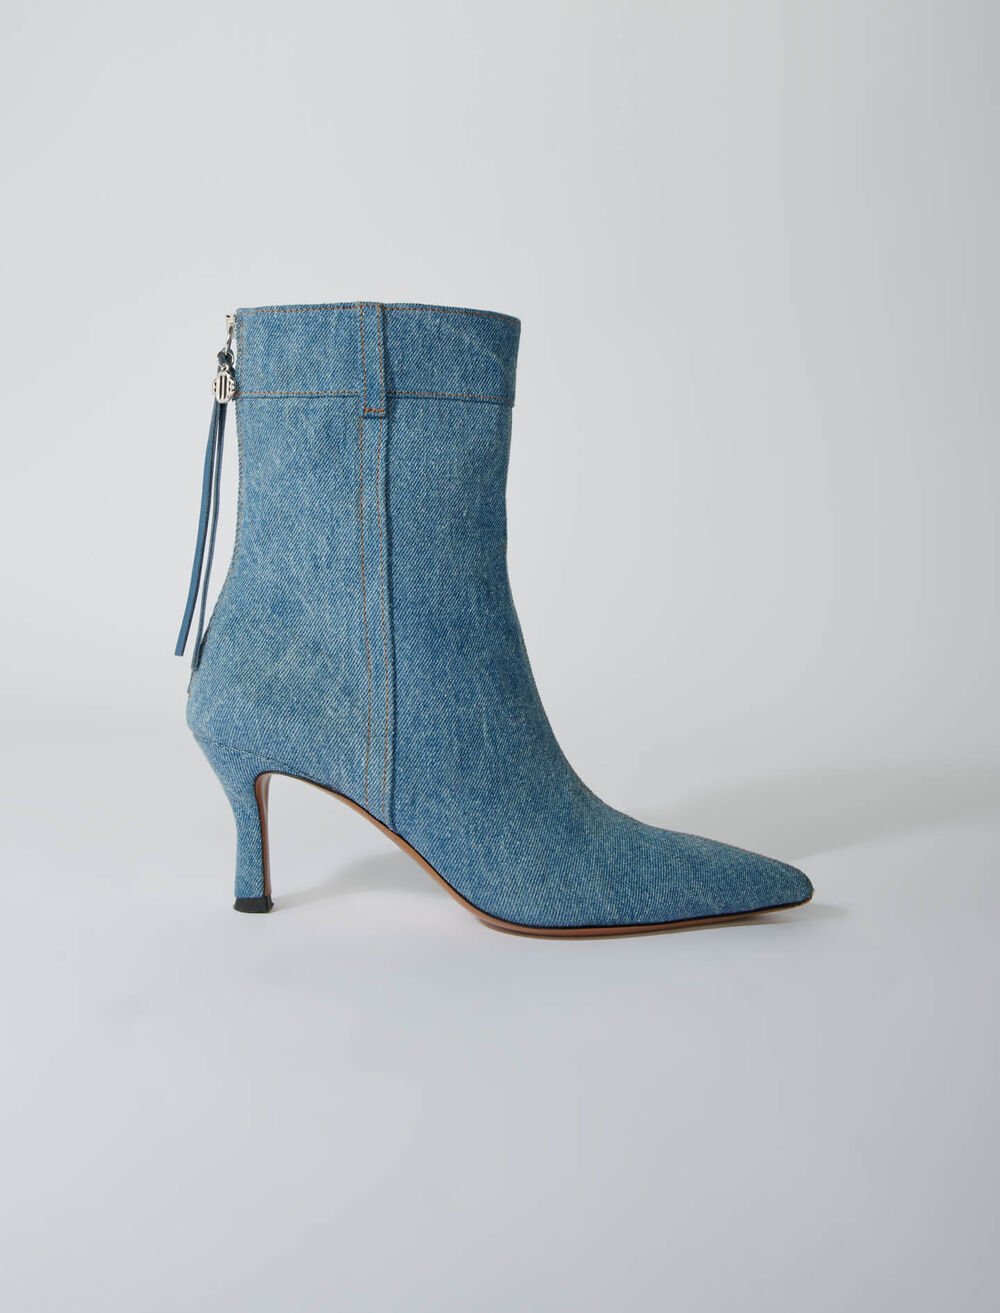 Denim Boots With Pointed Toe